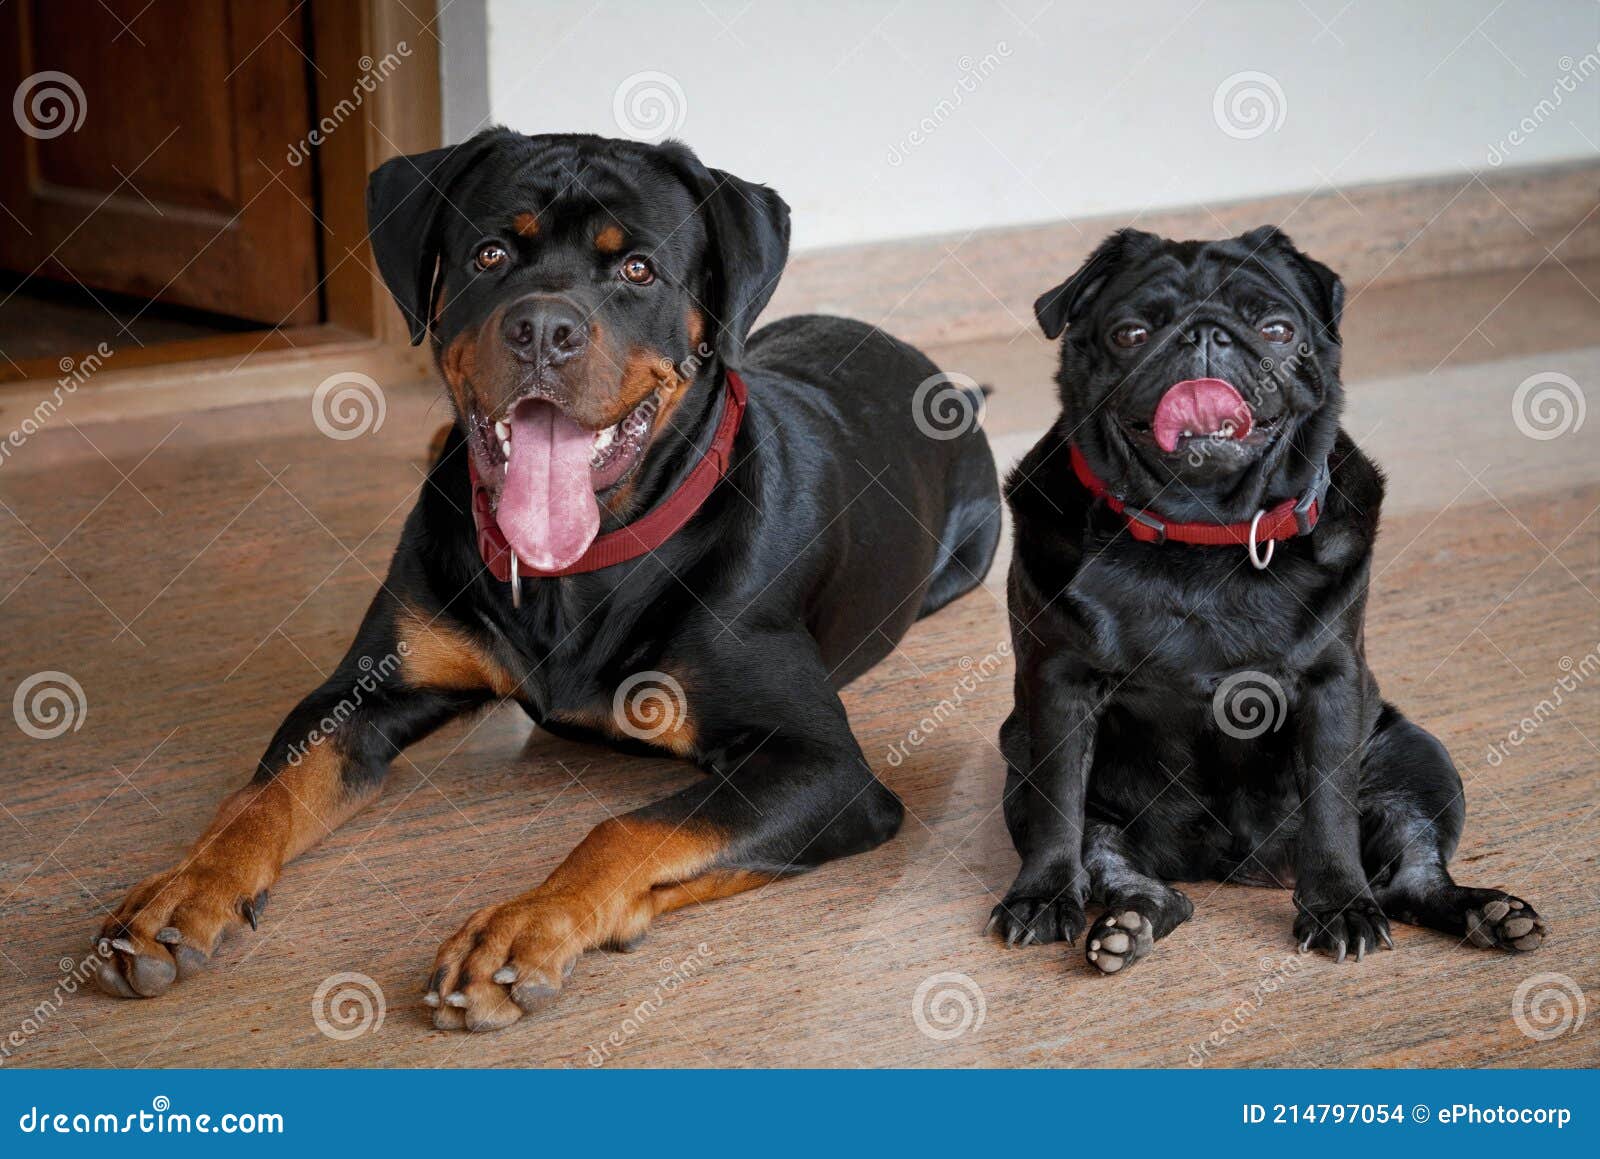 Rottweiler a Popular Family Guardian Dog and Pug with Distinct Features  Stock Photo - Image of breed, friend: 214797054